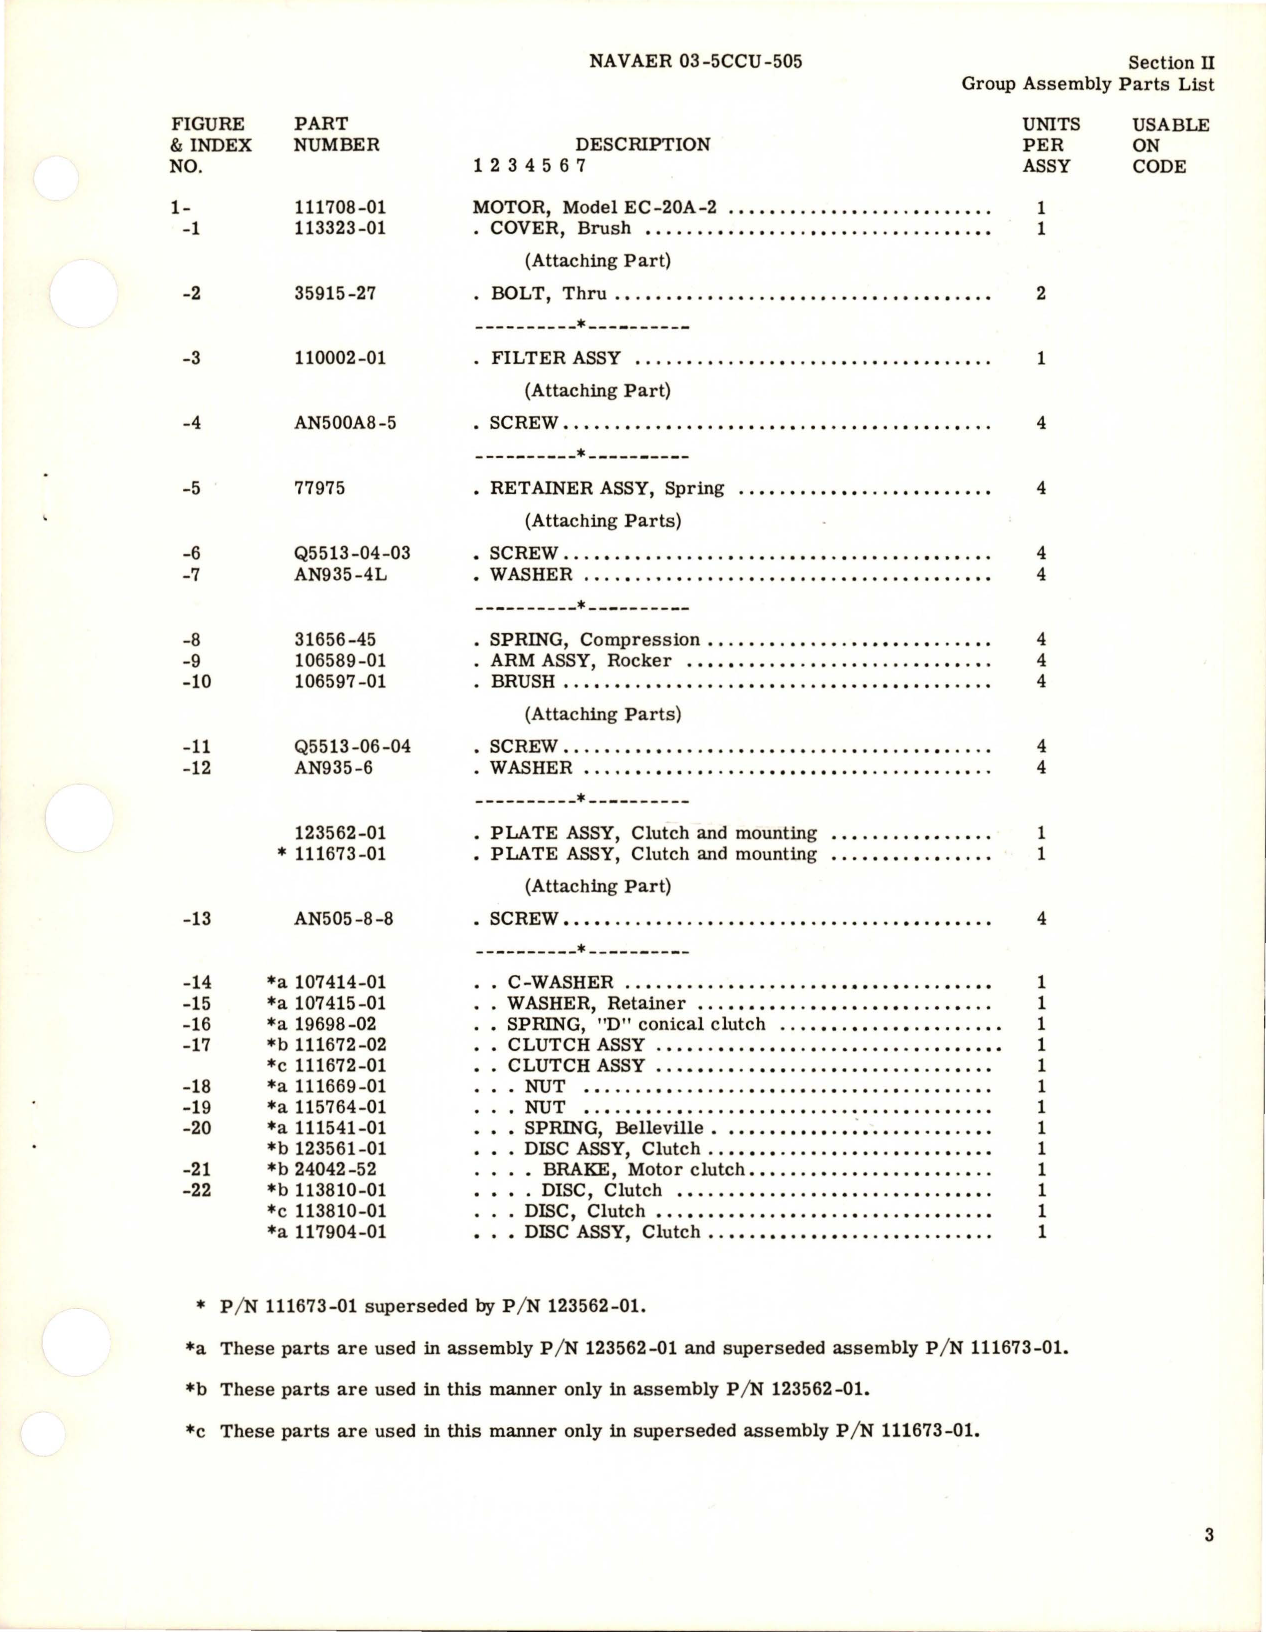 Sample page 5 from AirCorps Library document: Illustrated Parts Breakdown for E Frame Motor - Parts 111708-01, 111708-02, and 114320-01 